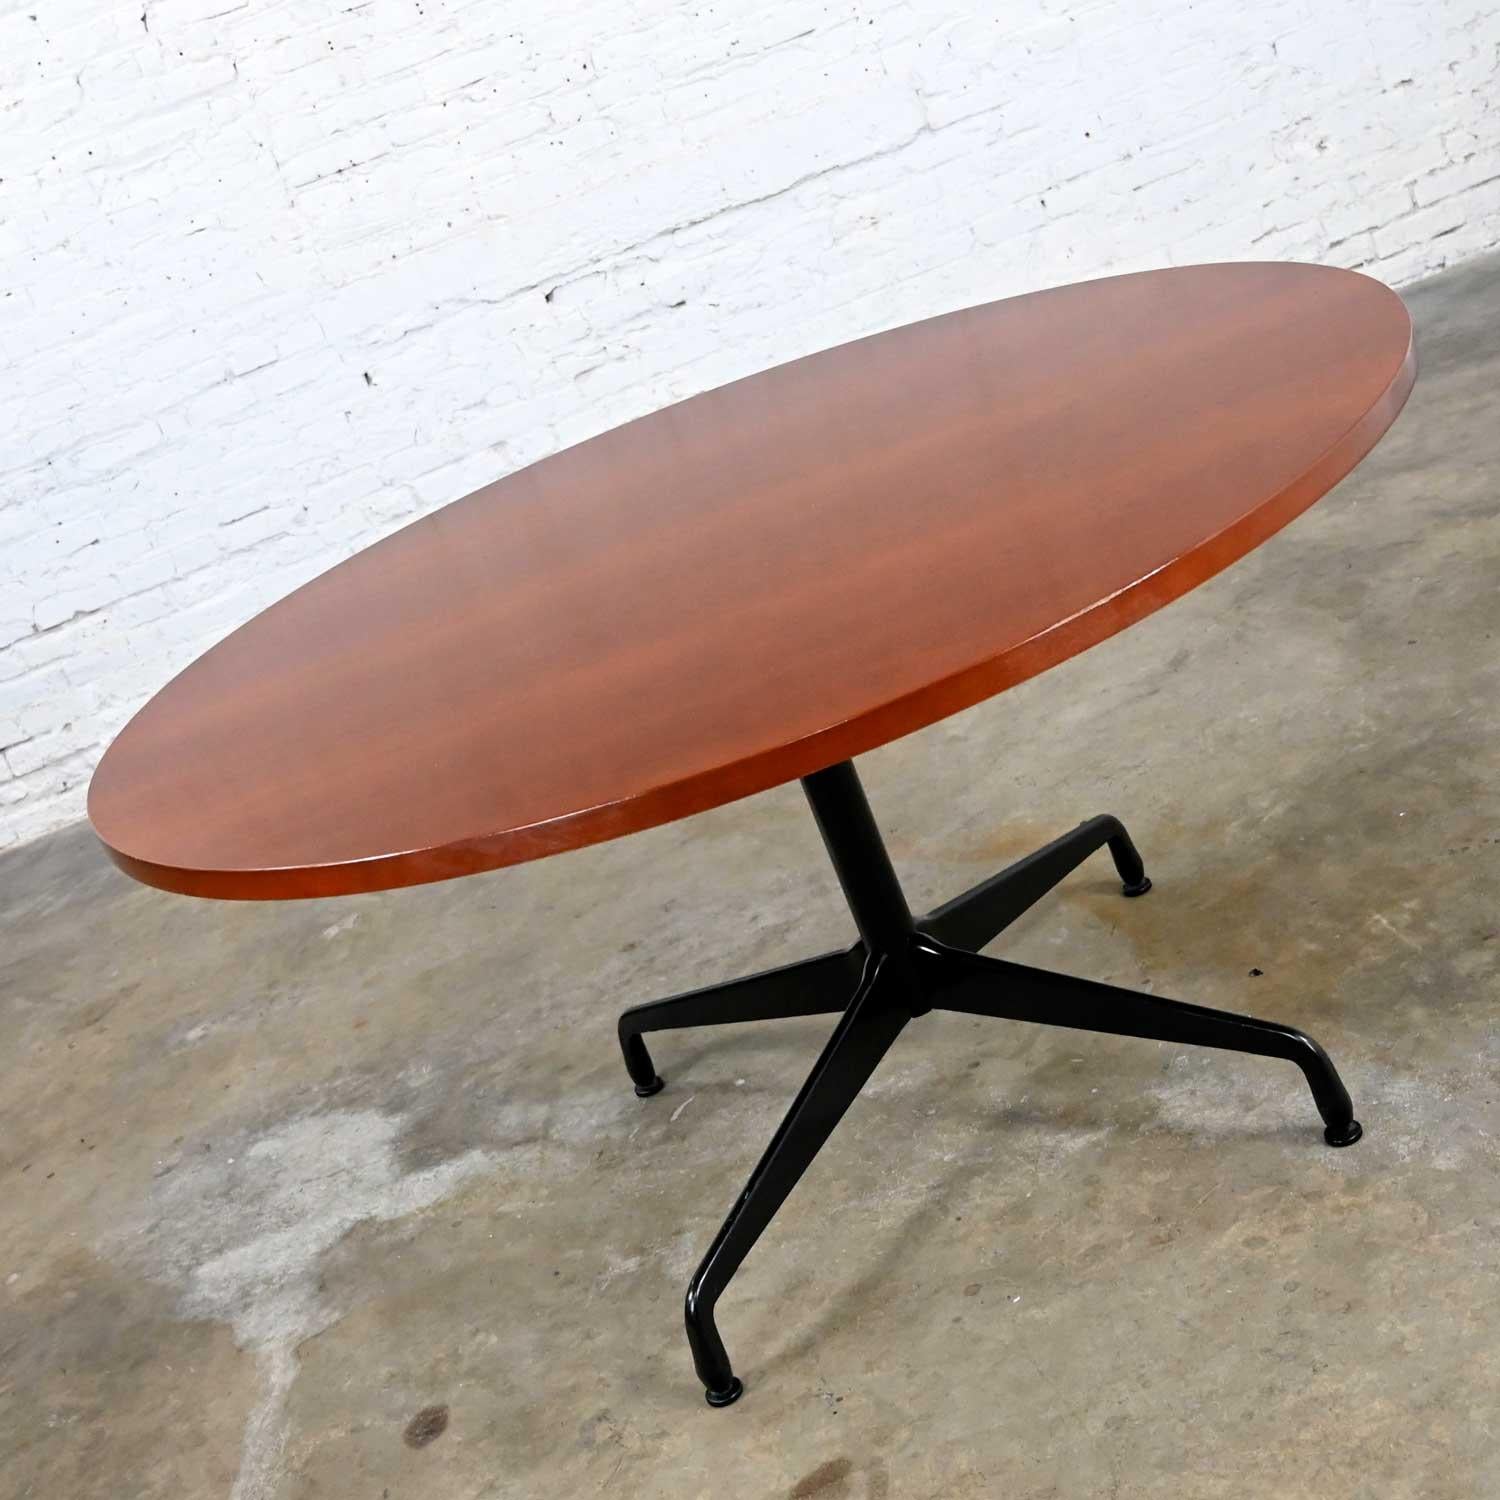 Wonderful Eames for Herman Miller round top table with universal pedestal base and dark cherry finish. Beautiful condition, keeping in mind that this is vintage and not new so will have signs of use and wear. There is a small rough spot on the